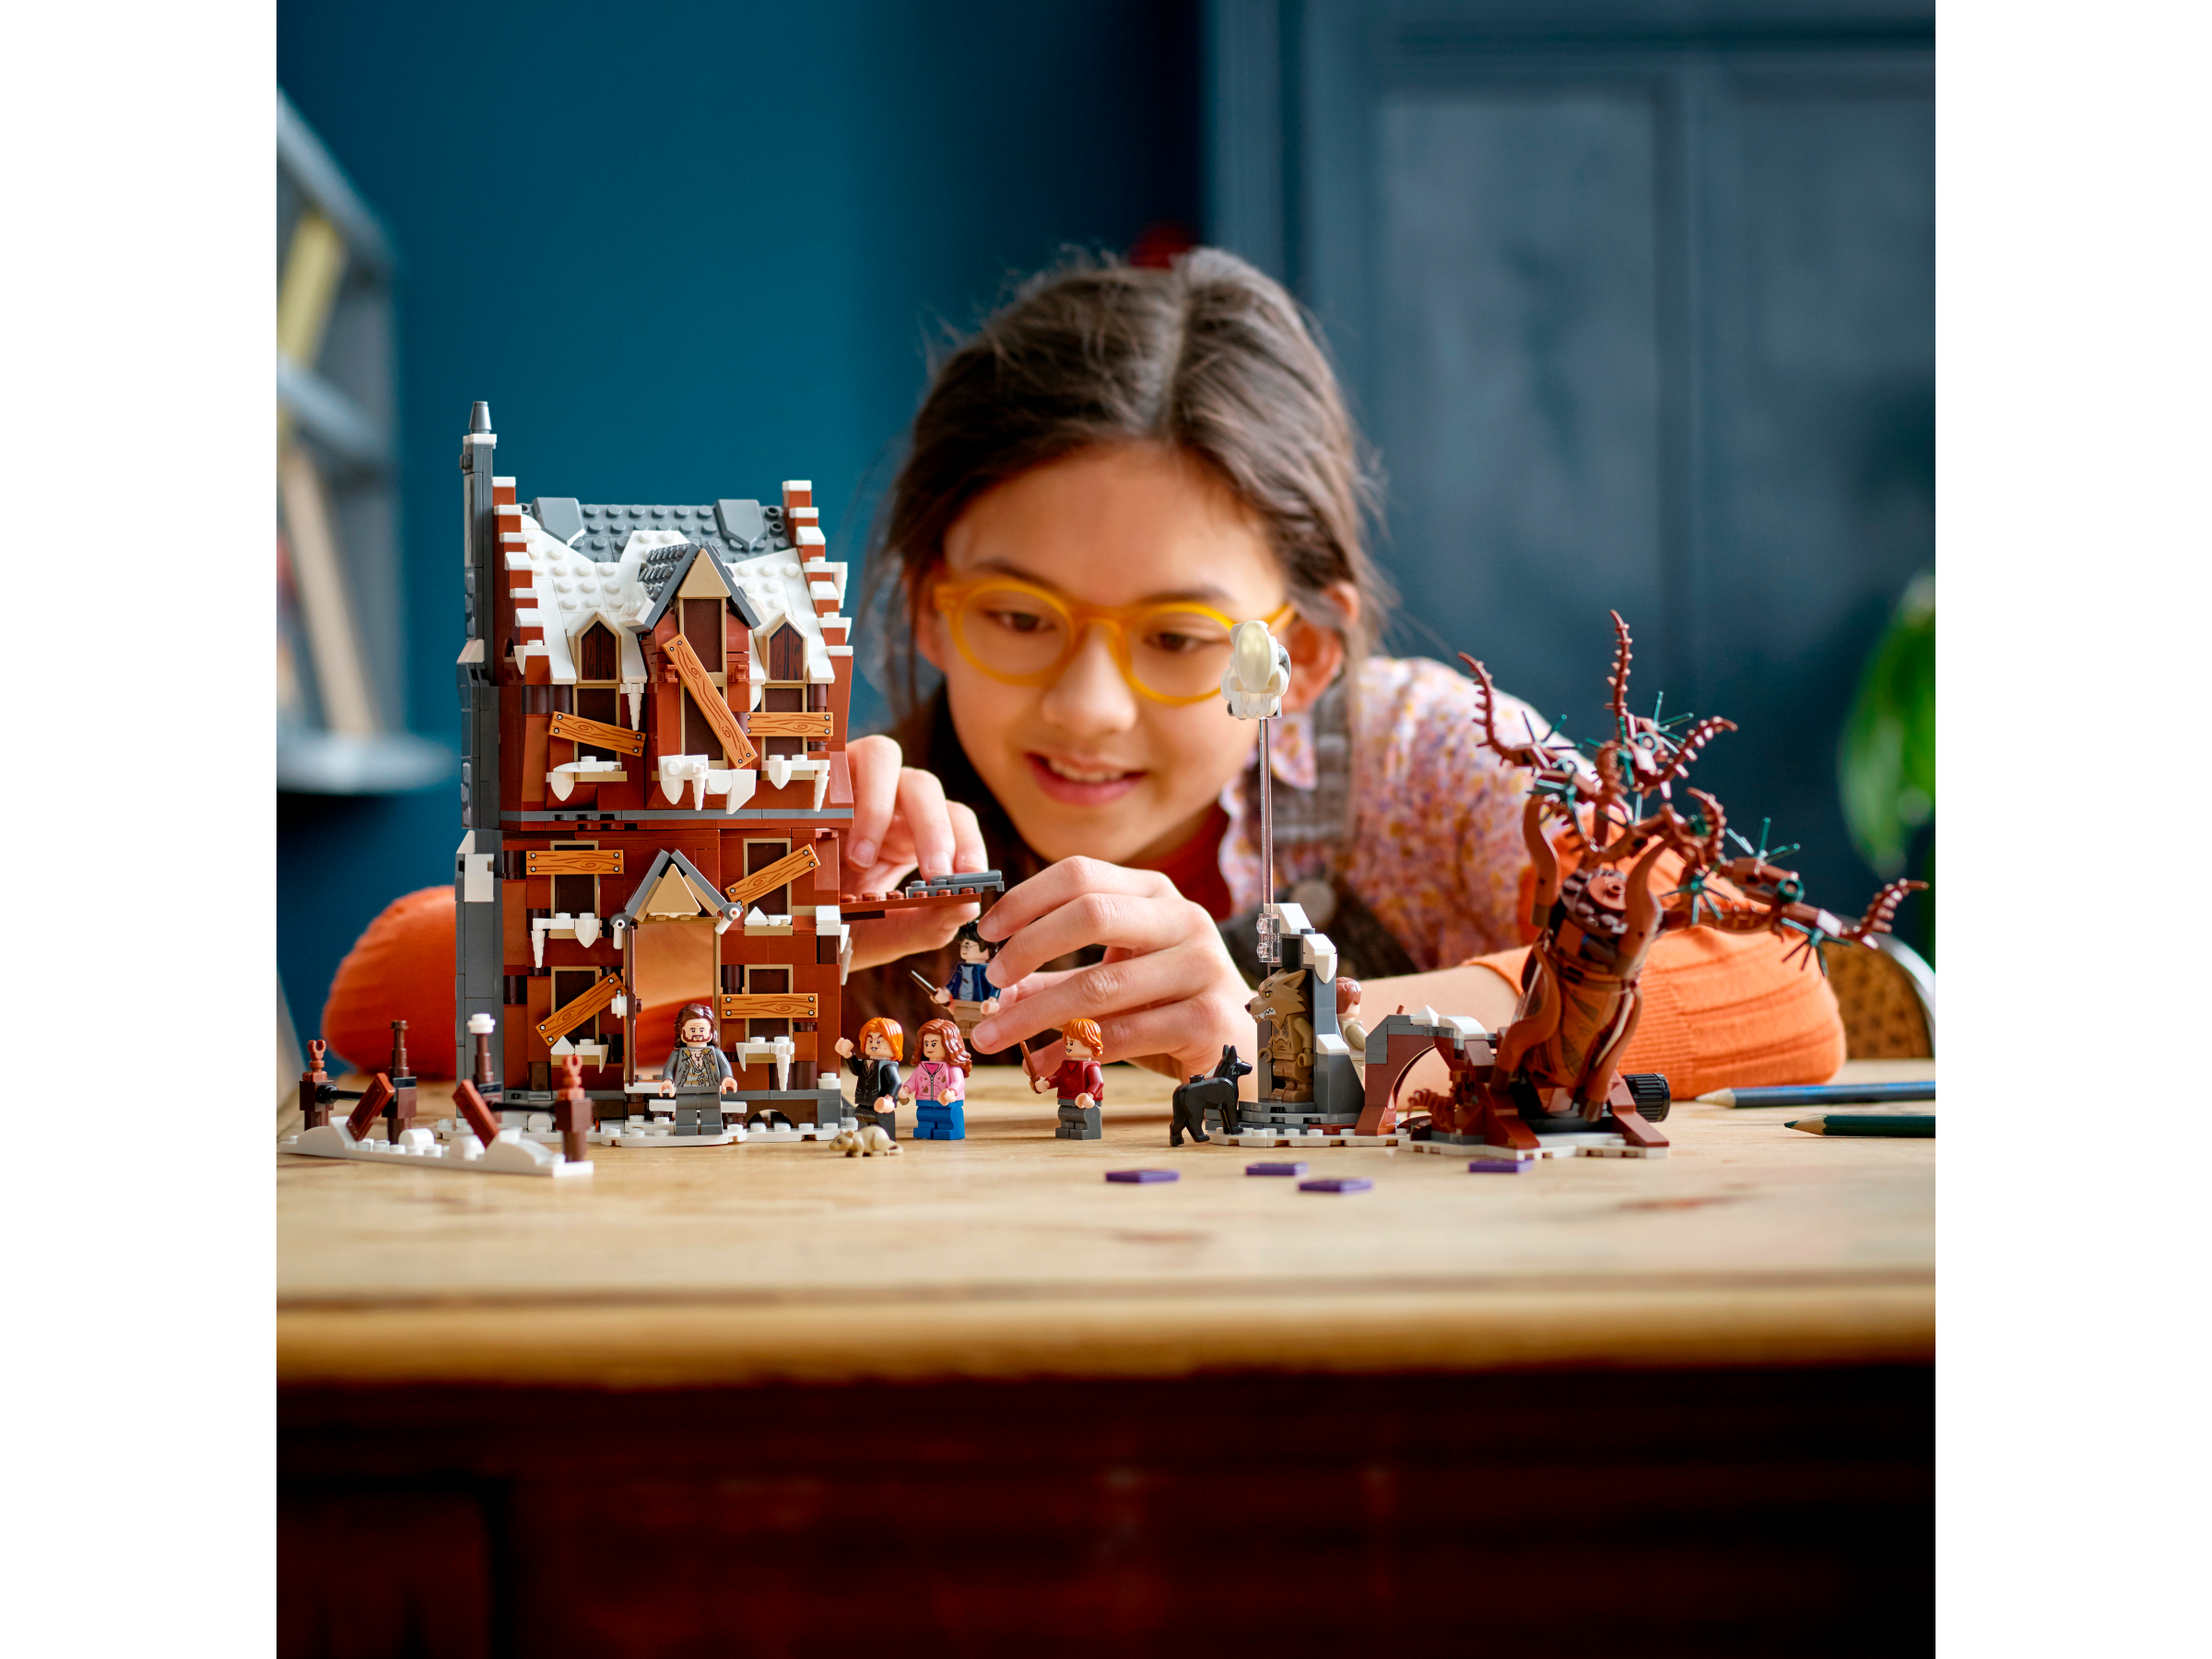 The Shrieking Shack & Whomping Willow™ 76407 | Harry Potter™ | Buy online  at the Official LEGO® Shop US